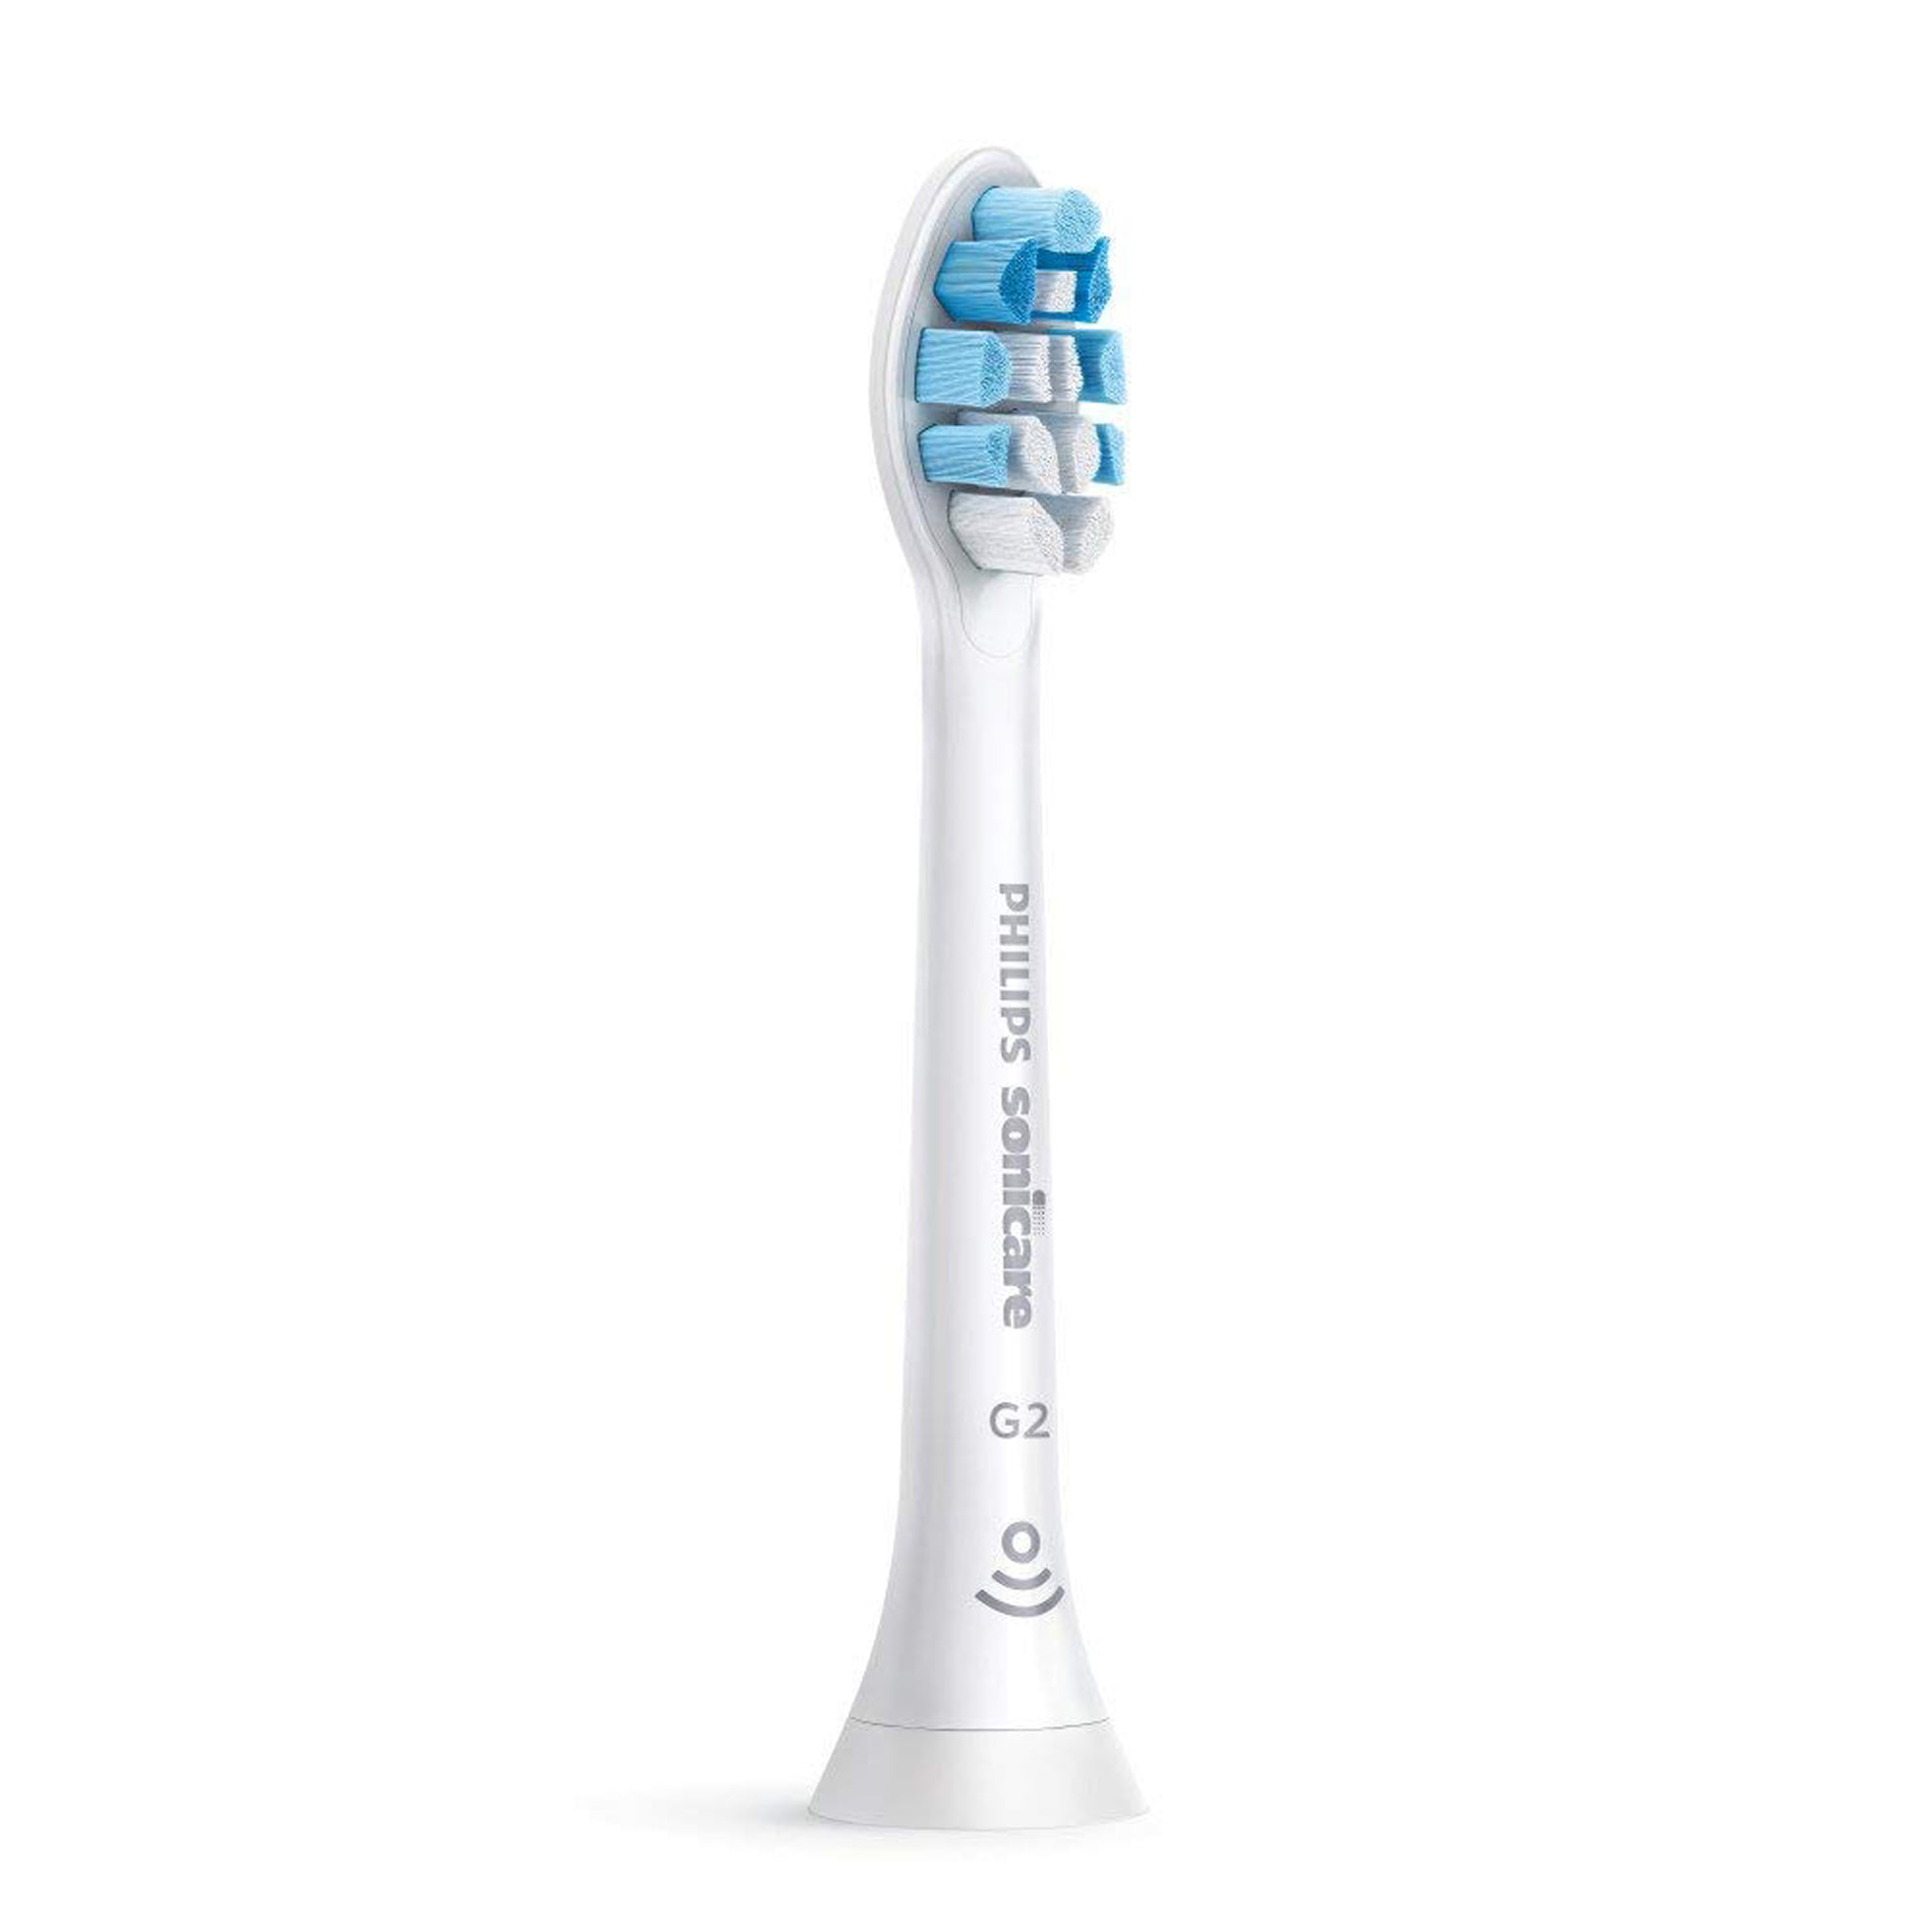 Eloquent Disconnection suggest Philips Sonicare G2 Optimal Gum Health Care Replacement Toothbrush Heads,  HX9033/65, White 3-pk - Walmart.com